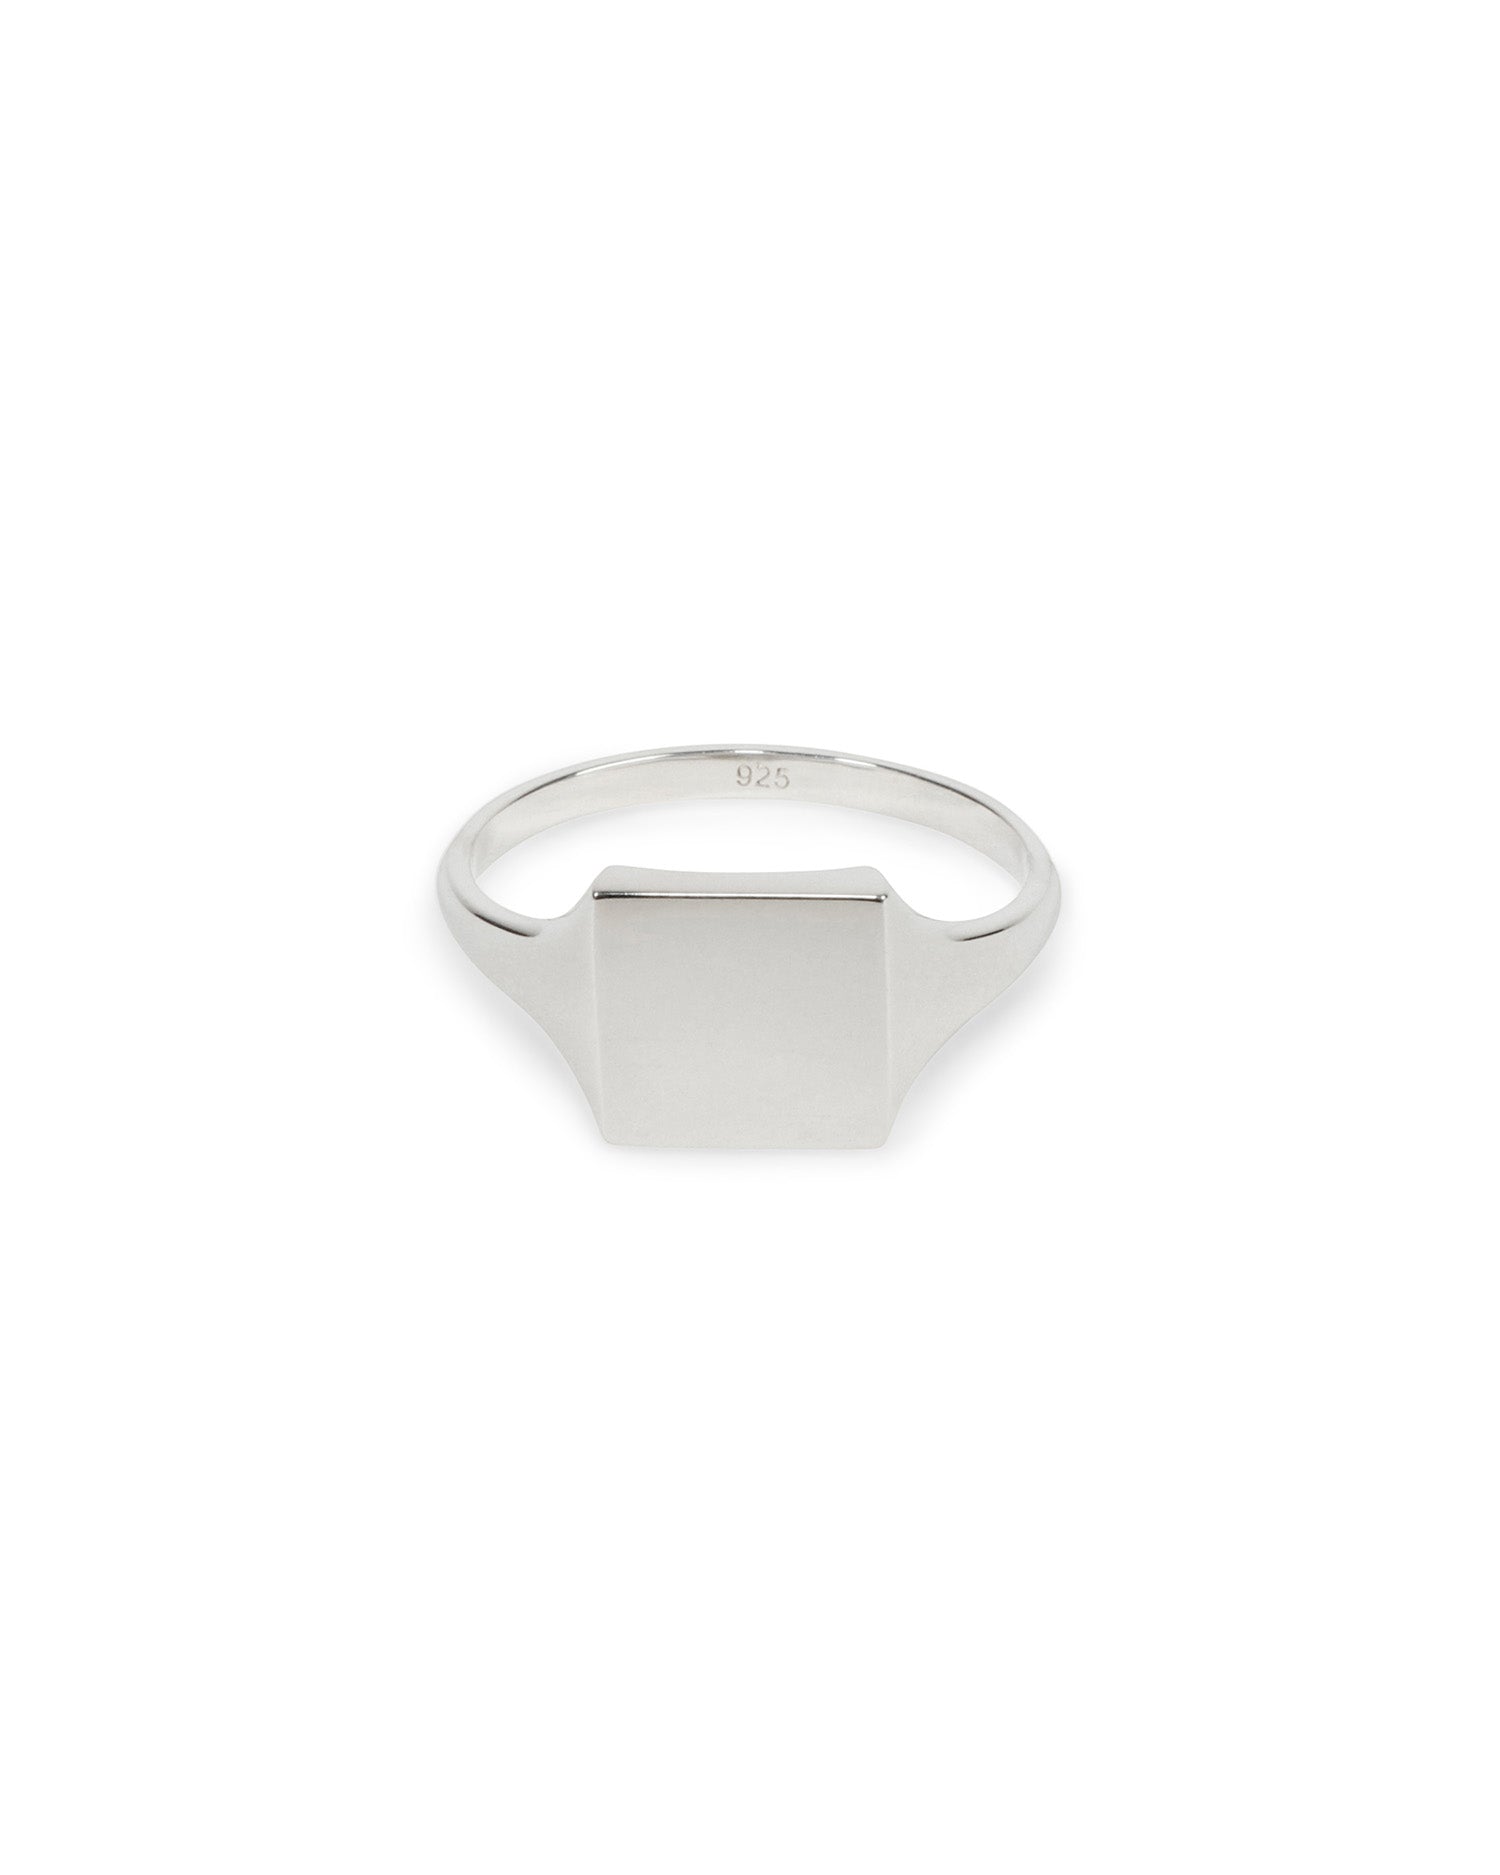 TYPE 011 Slim Square Signet Ring - 925 Sterling Silver